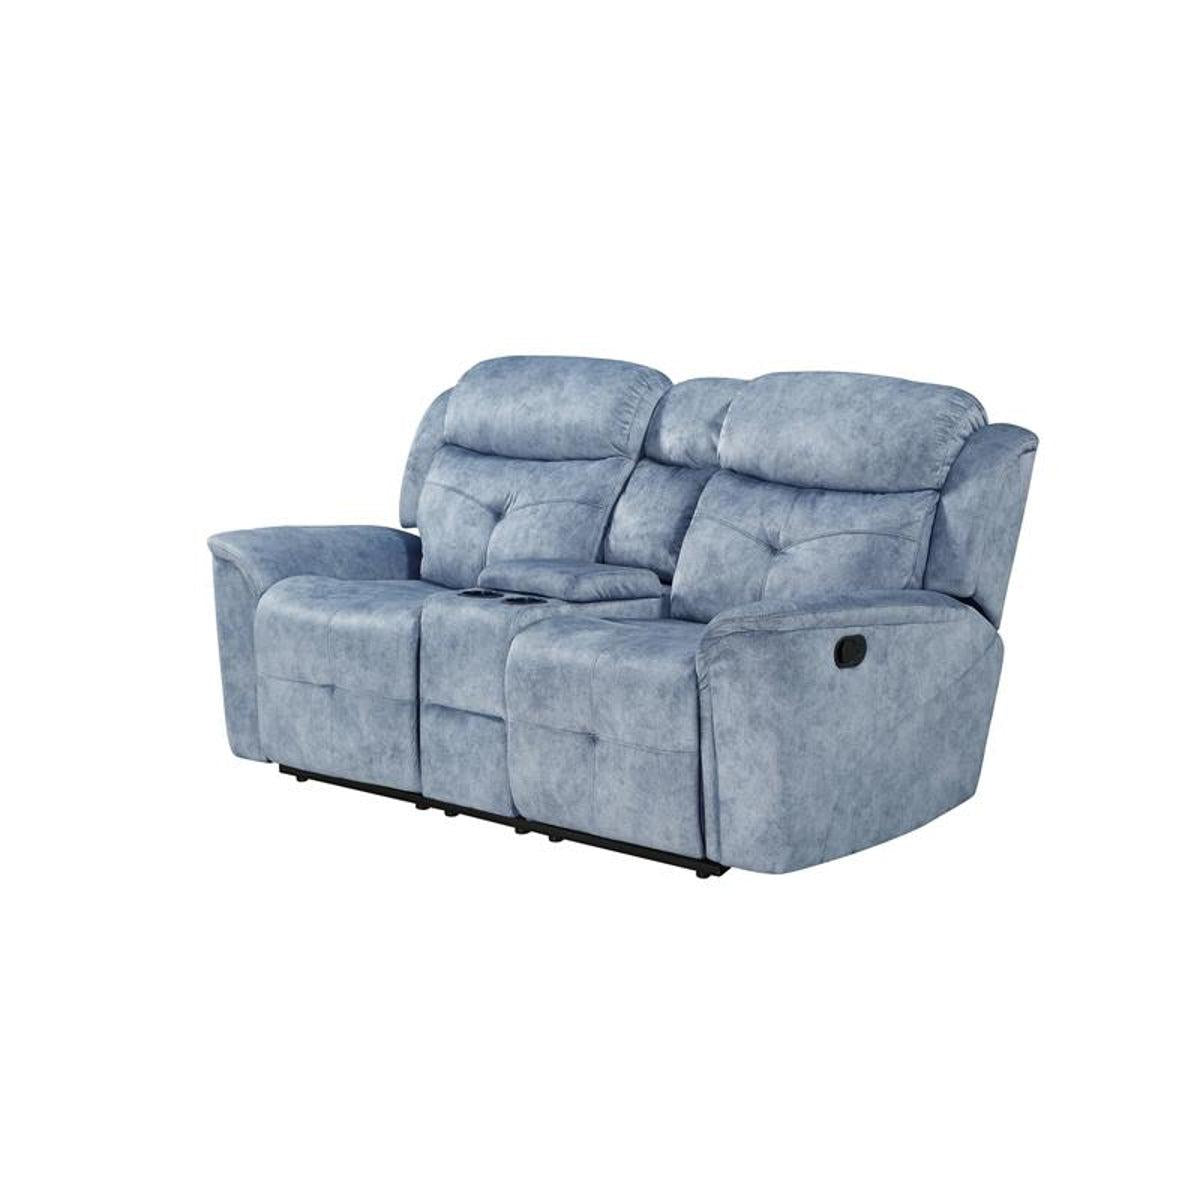 Acme Furniture Mariana Motion Loveseat in Silver Blue 55036 Acme Furniture Mariana Motion Loveseat in Silver Blue 55036 Half Price Furniture